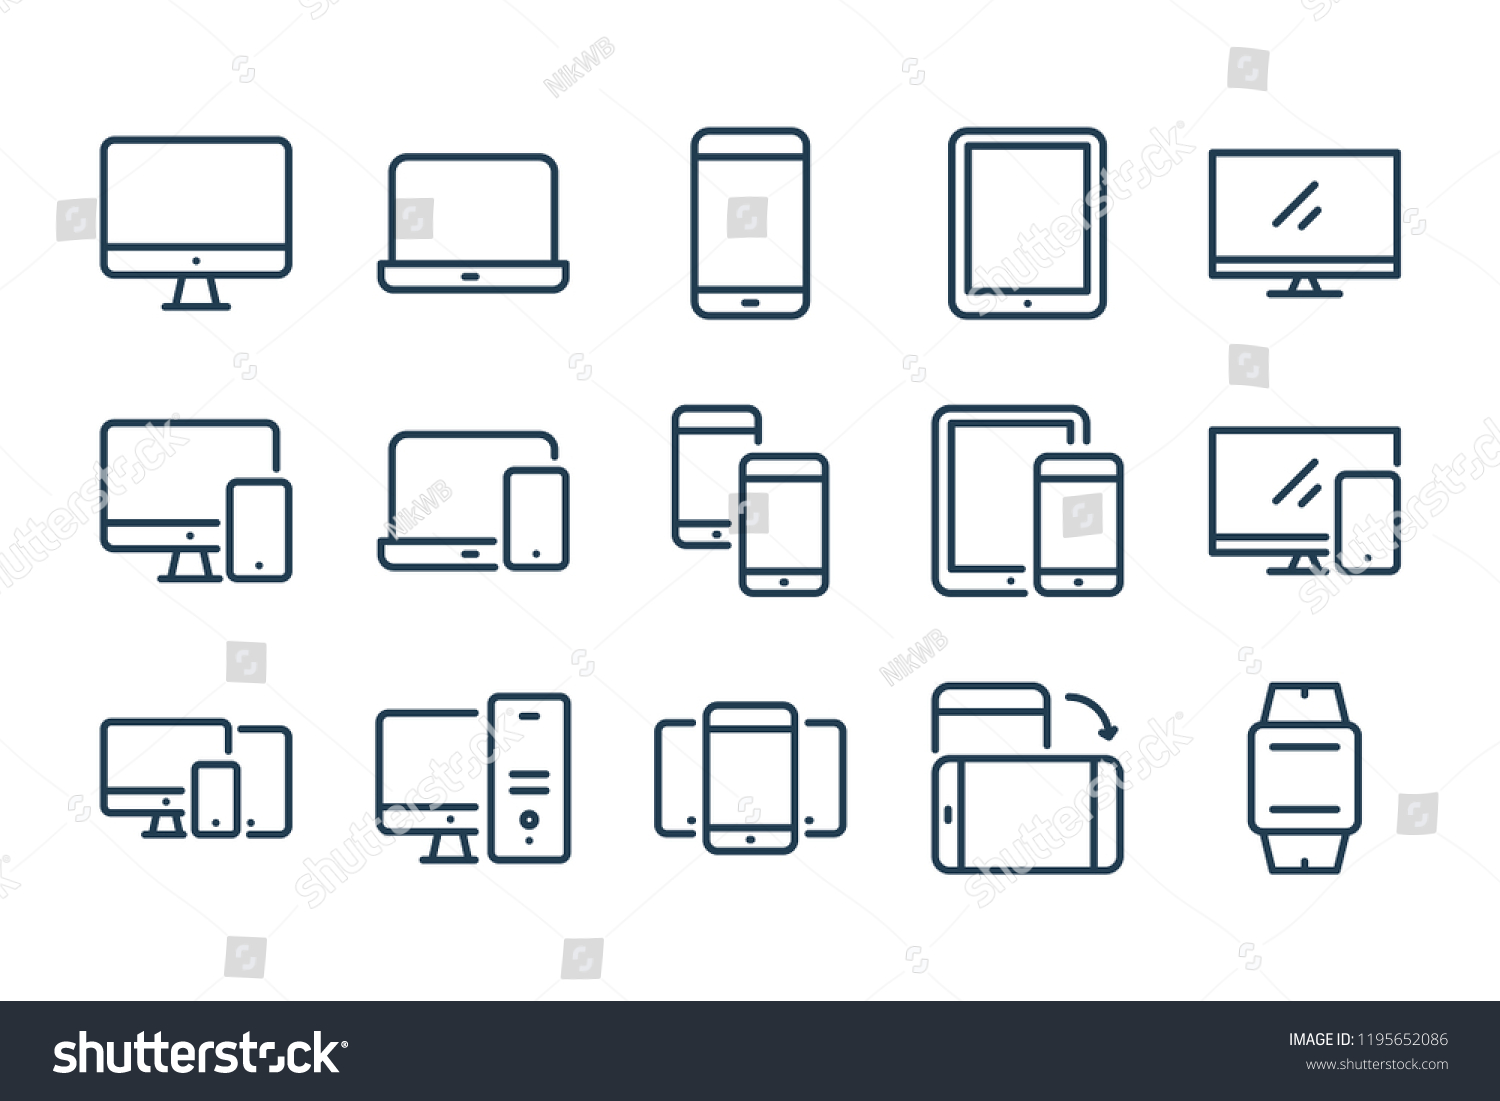 Device line icons. vector linear icon set.